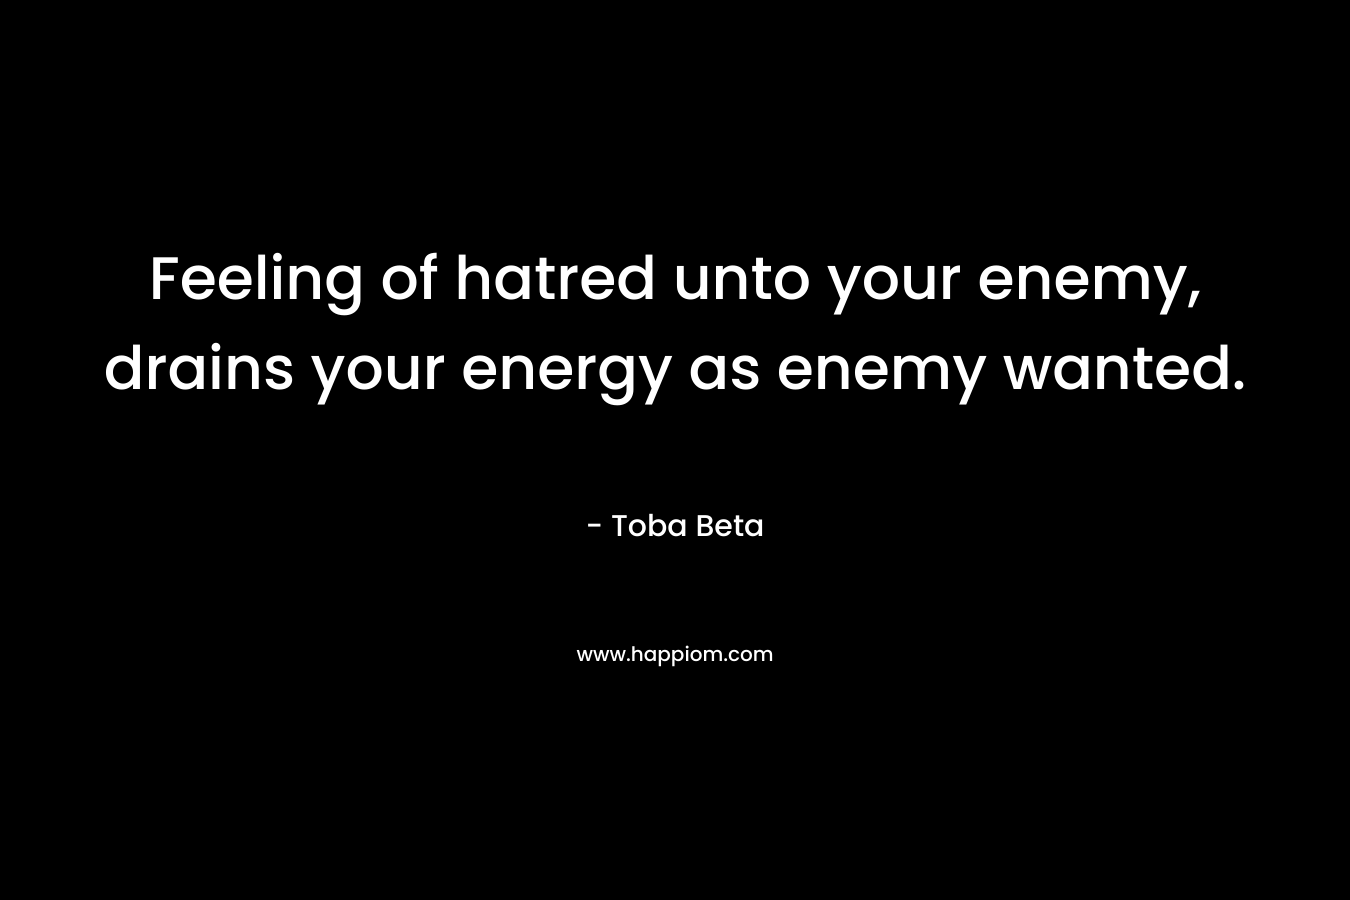 Feeling of hatred unto your enemy, drains your energy as enemy wanted.